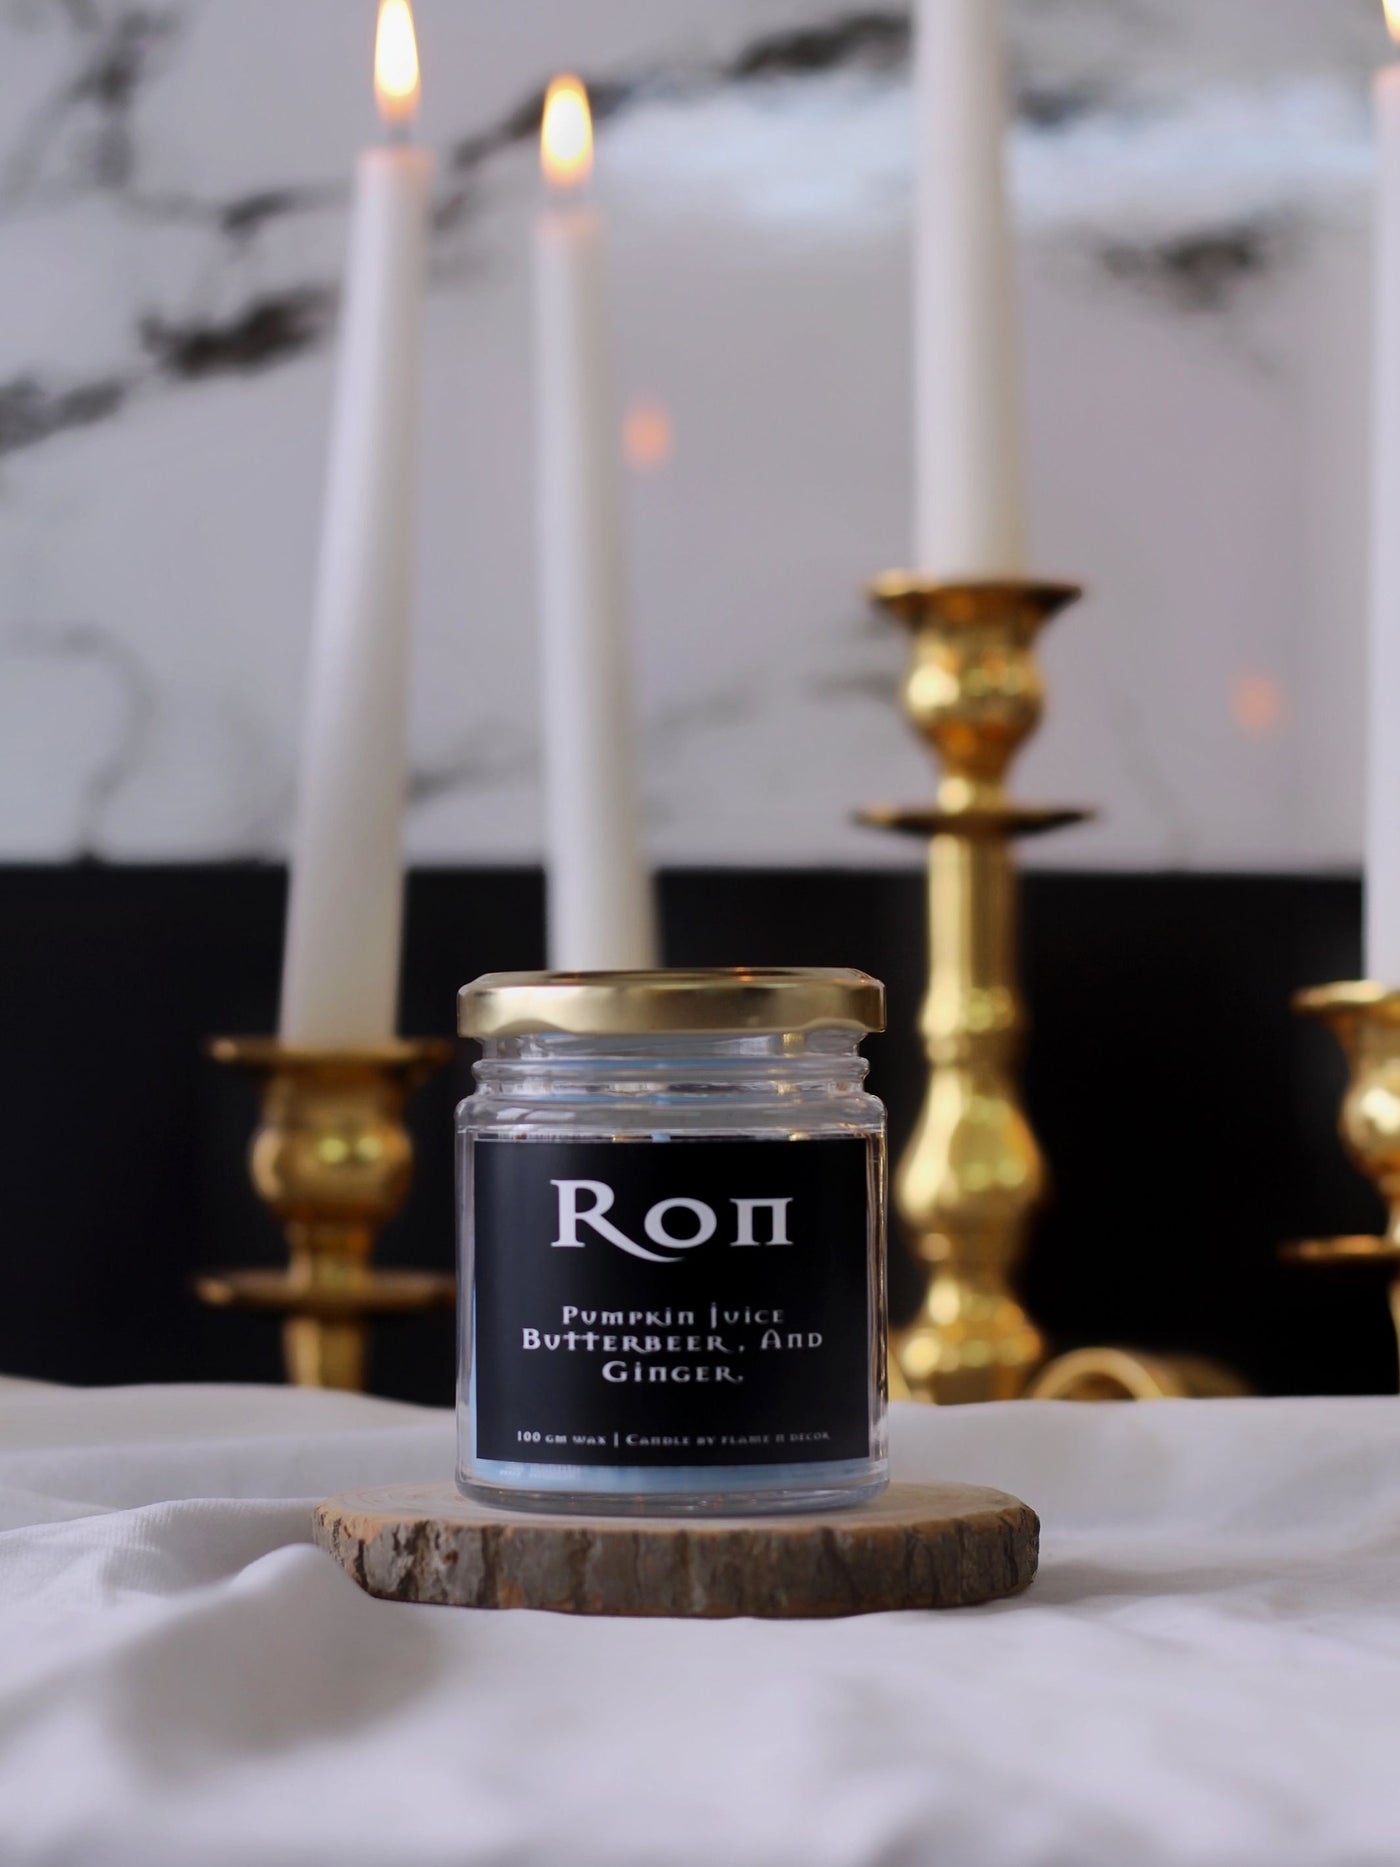 Ron Candle